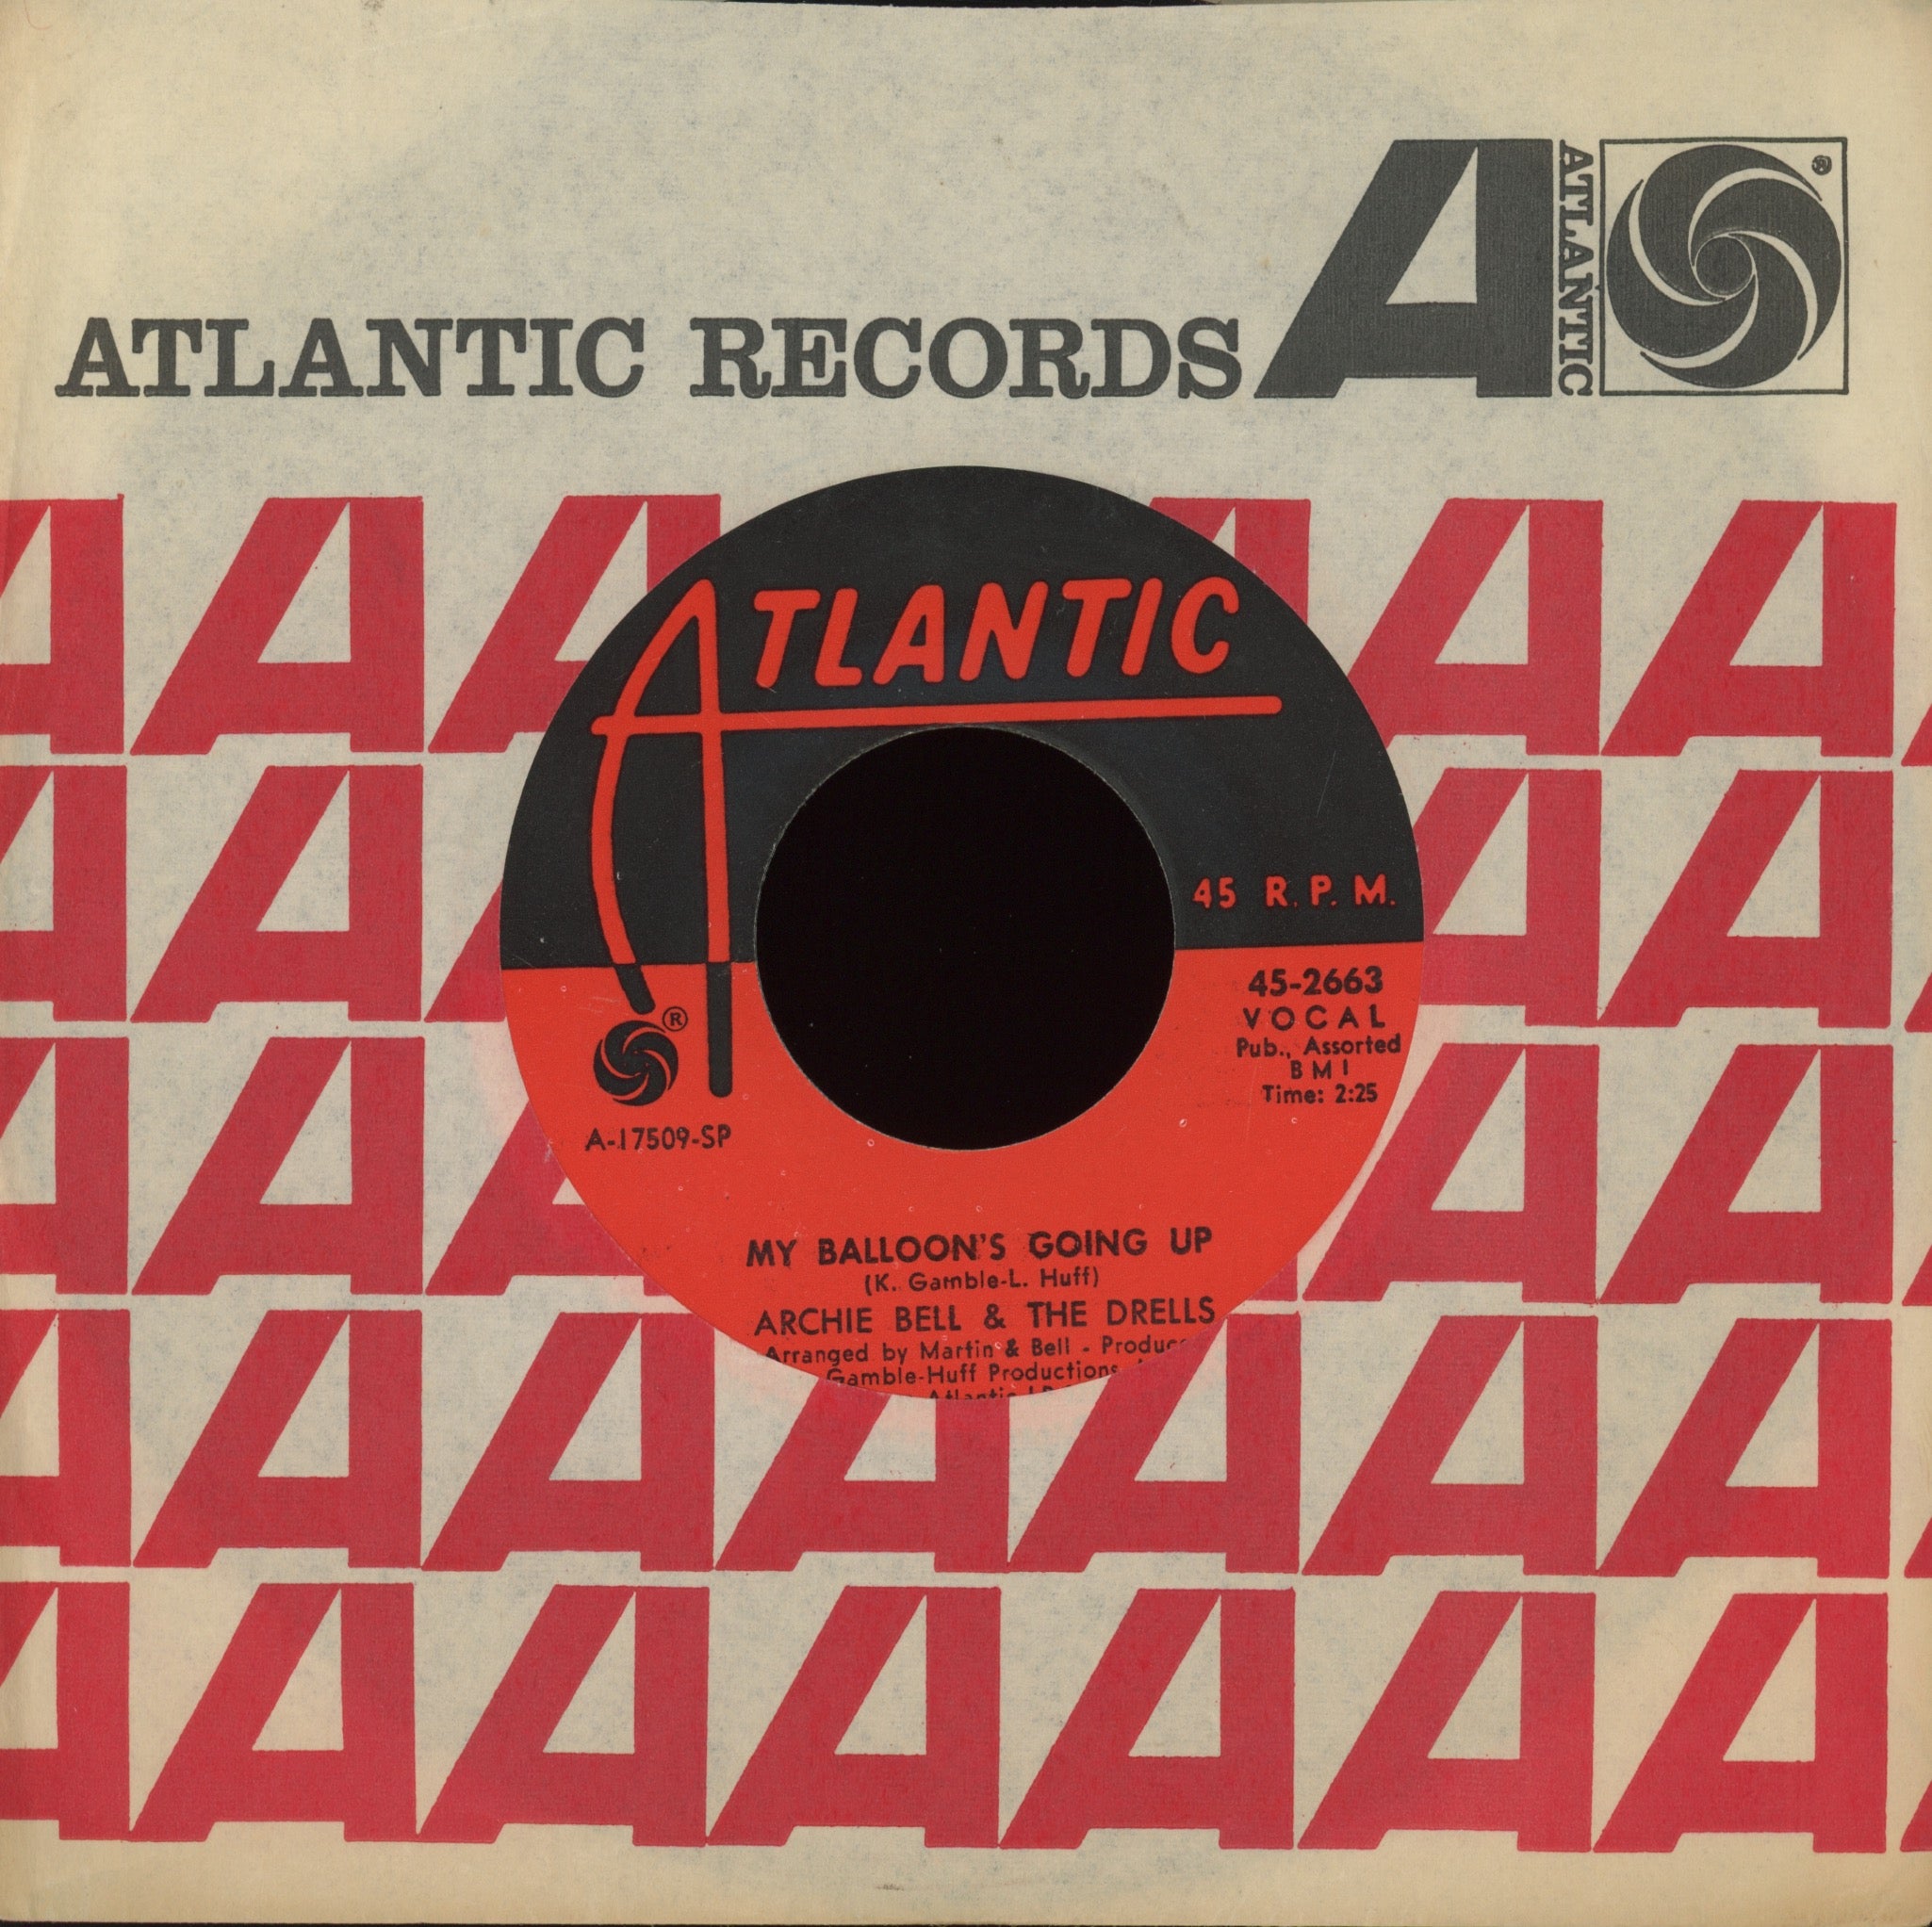 Archie Bell & The Drells - My Balloon's Going Up Northern Soul 45